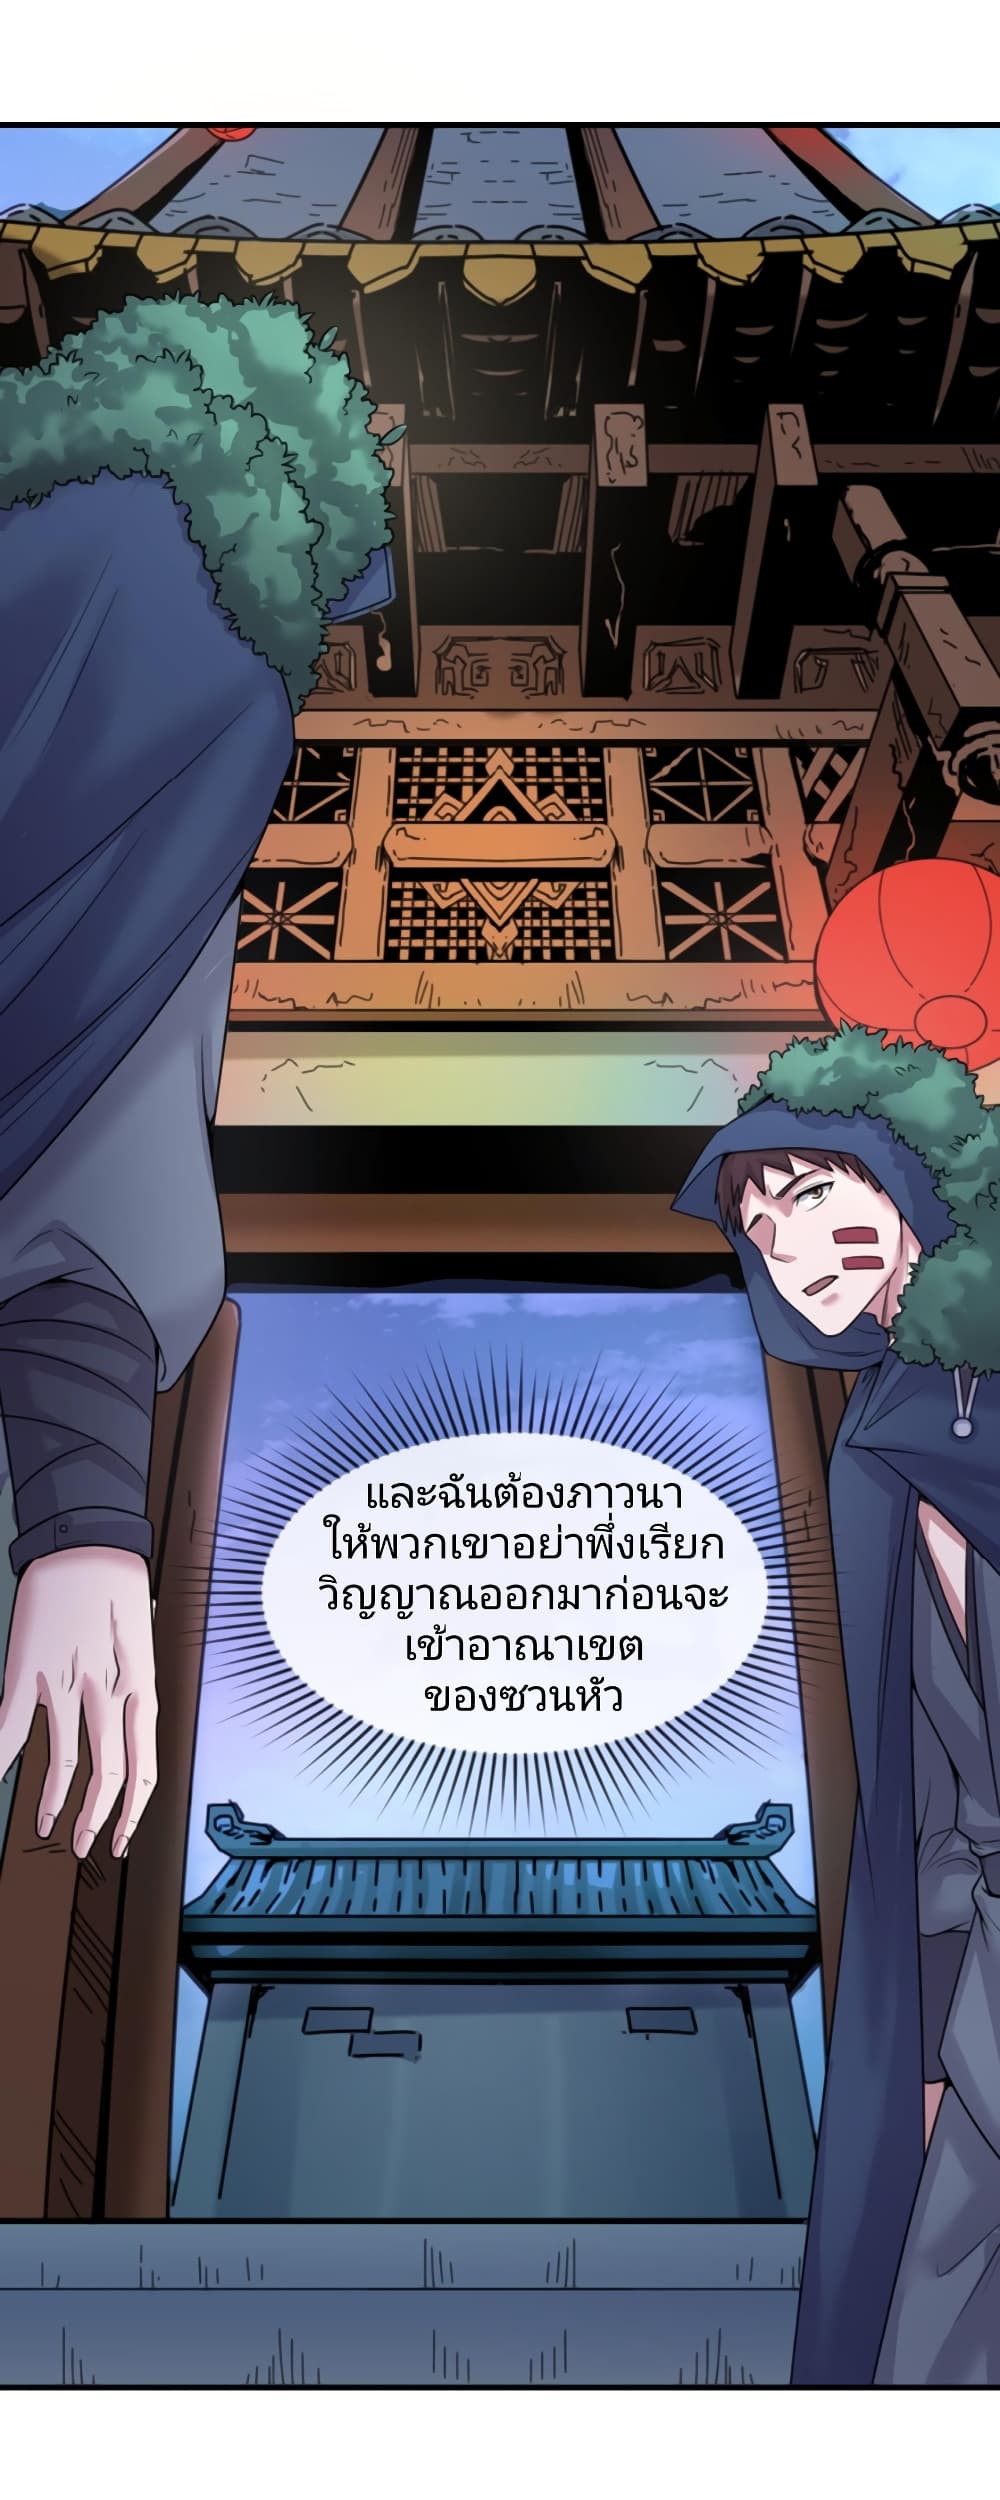 The Age of Ghost Spirits à¸à¸­à¸à¸à¸µà¹ 42 (12)